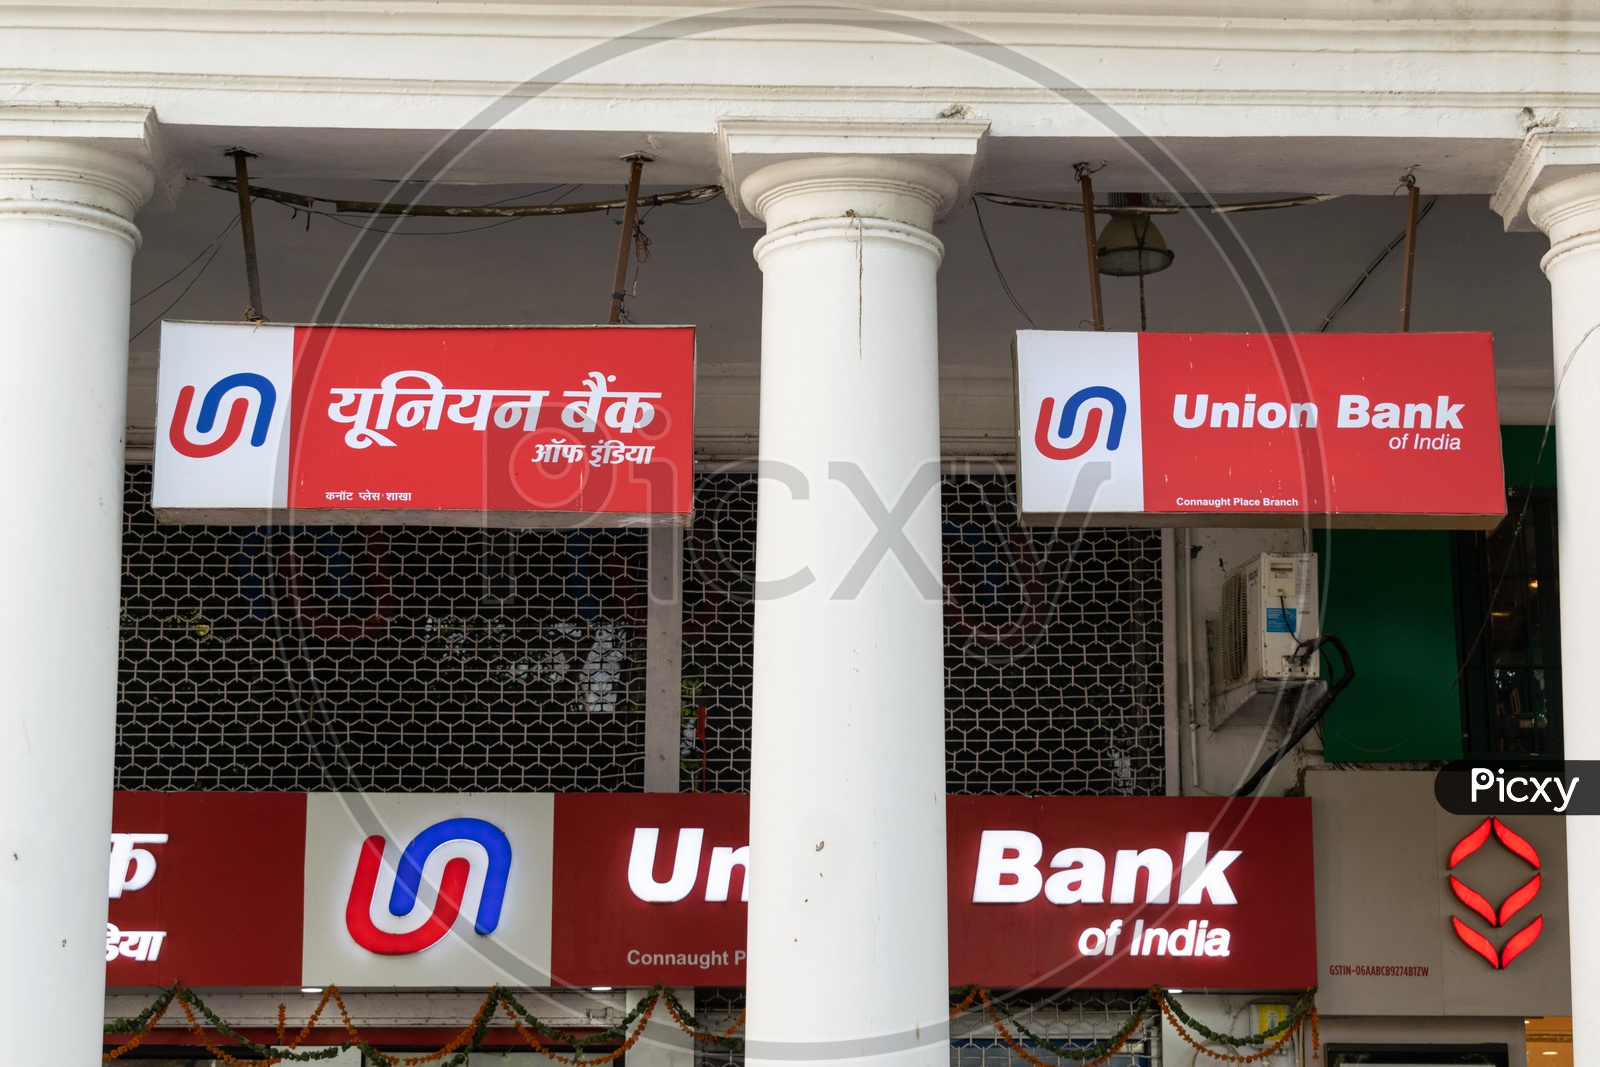 Branch of Union Bank of India at Cannaught Place, Rajiv Chowk